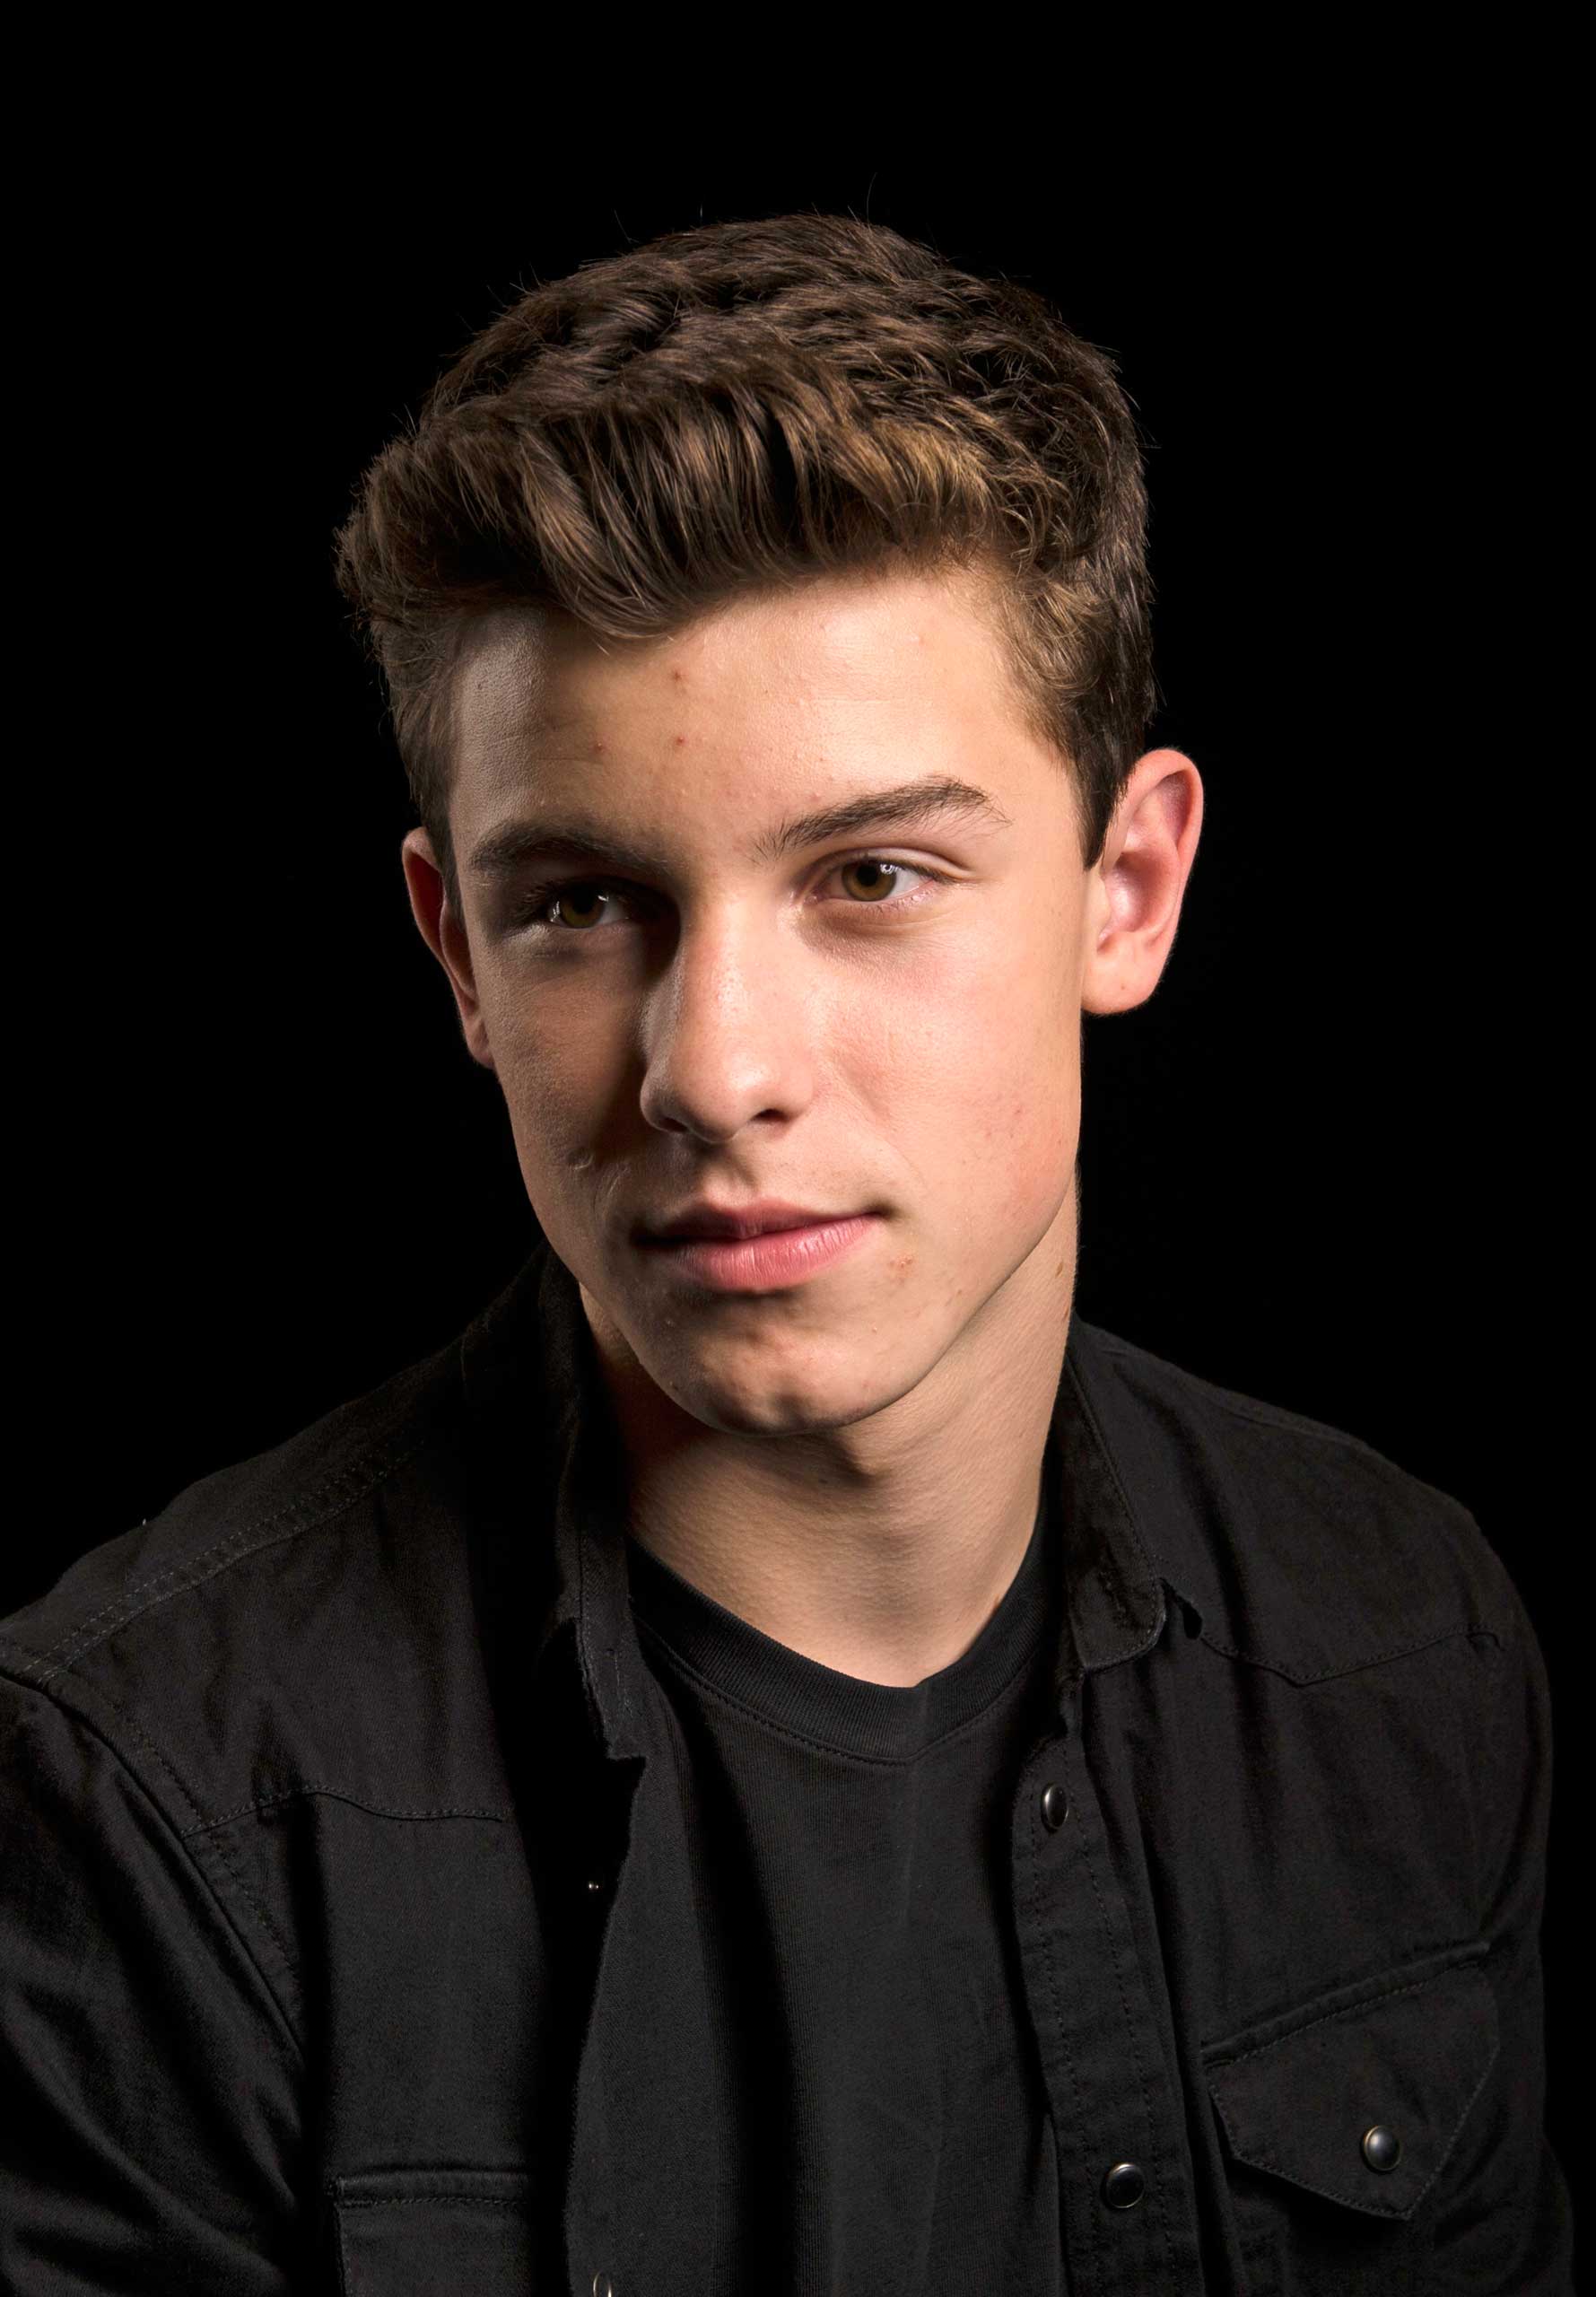 Canadian music artist Shawn Mendes poses for a portrait, on Wed., July 8, 2014 in New York. (Photo by Drew Gurian/Invision/AP)